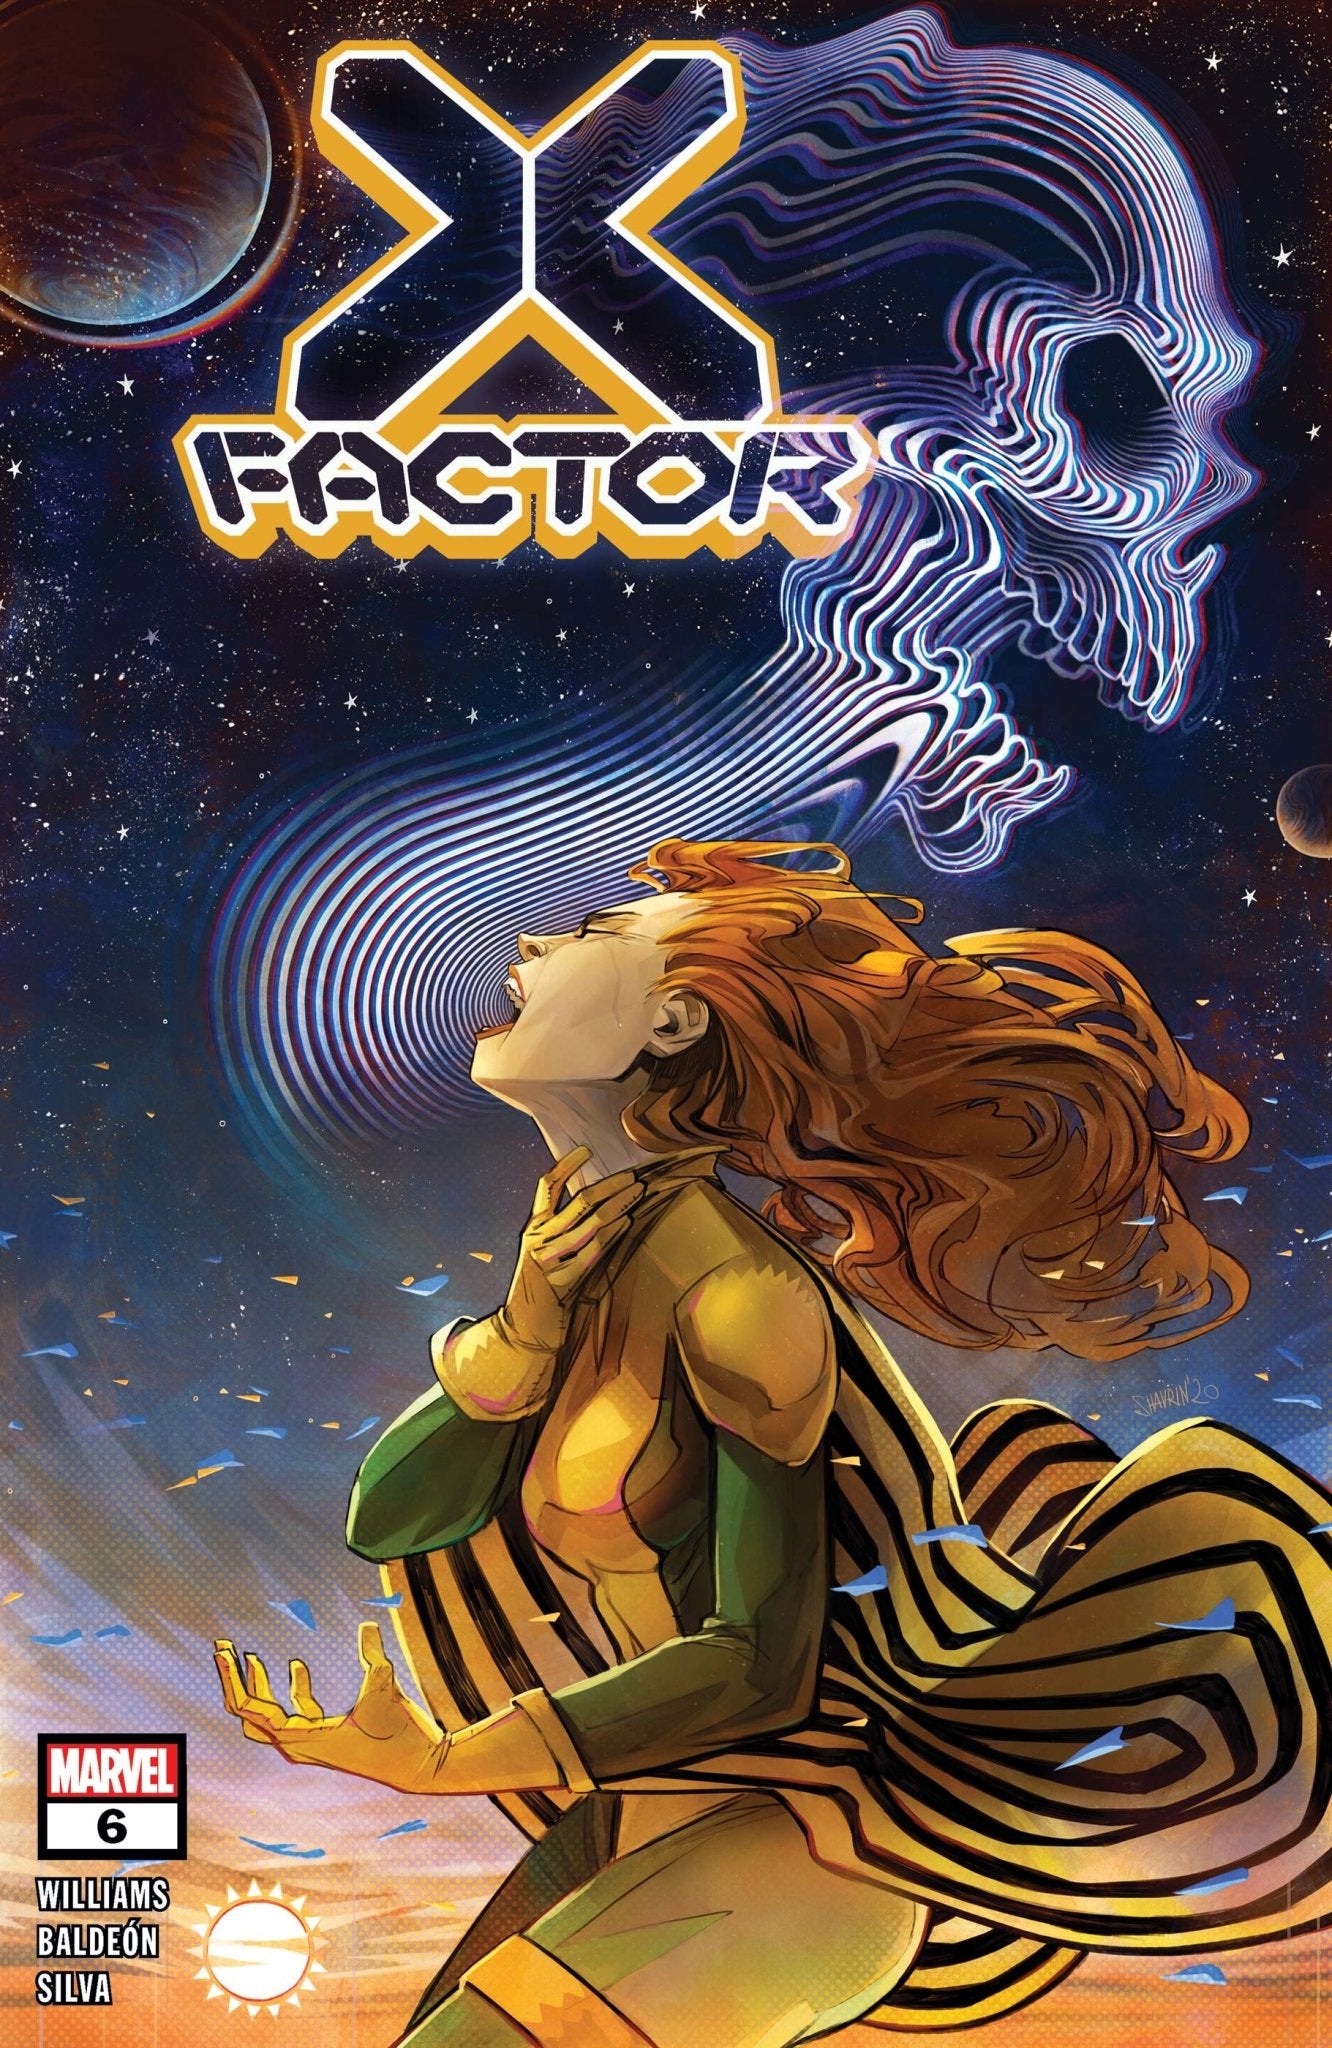 X-FACTOR #6 - The Comic Construct